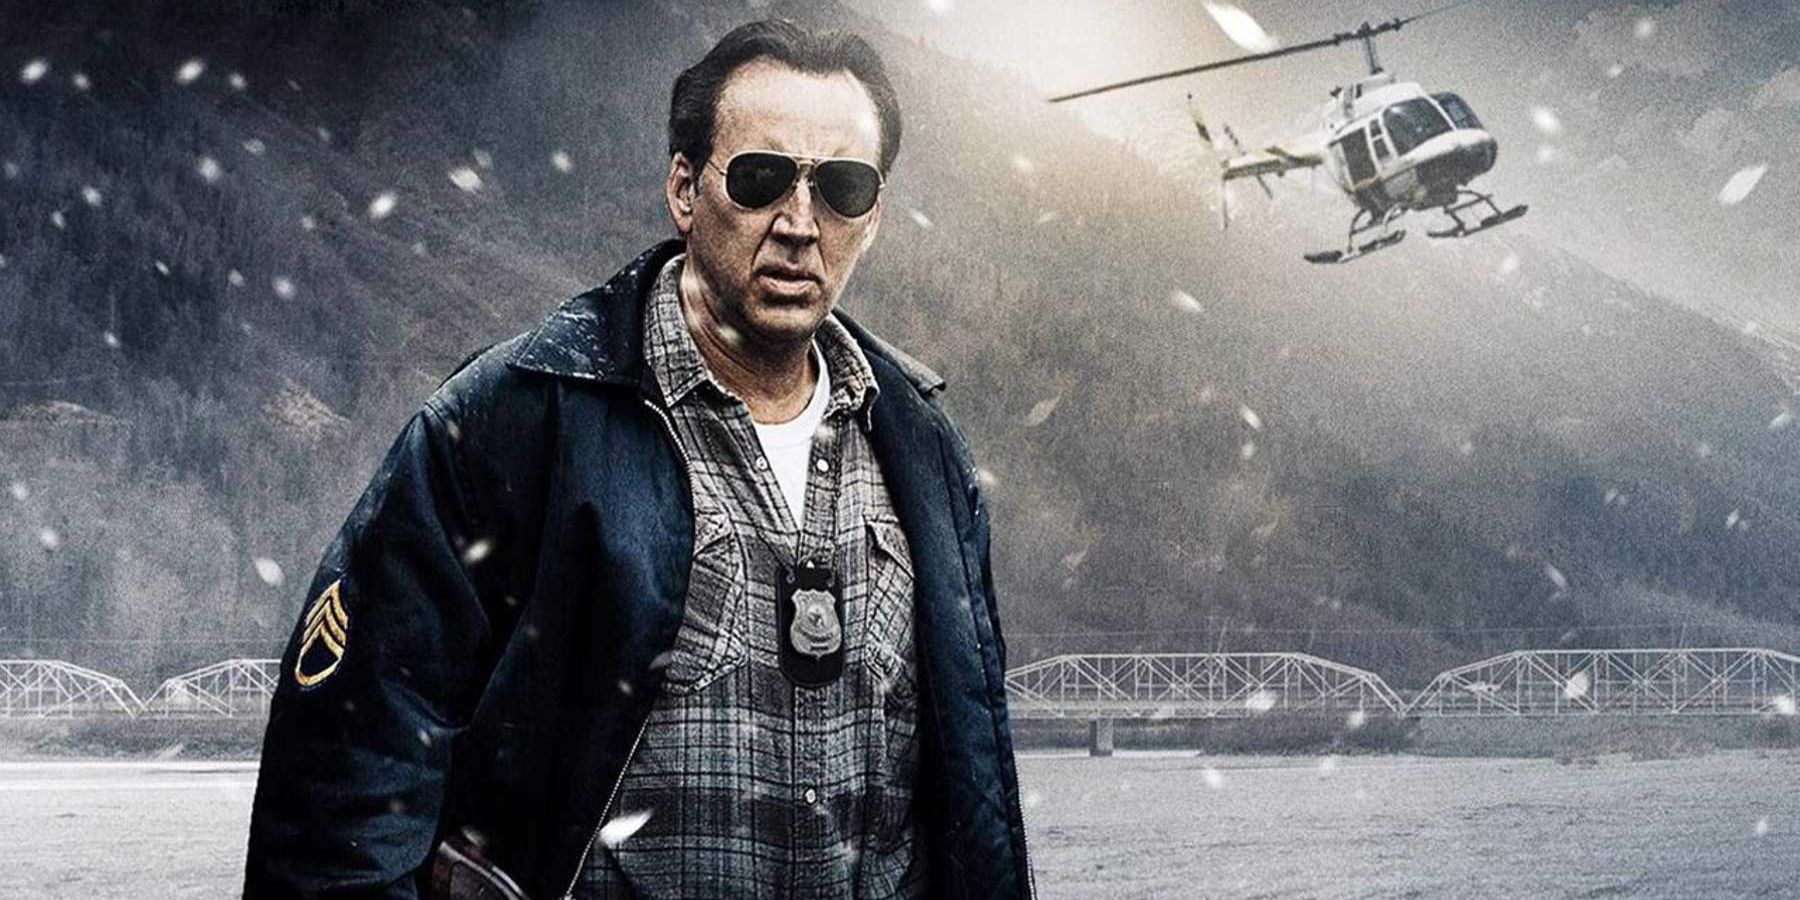 Nicolas Cage looks at the camera as a helicopter flies behind him in The Frozen Ground.